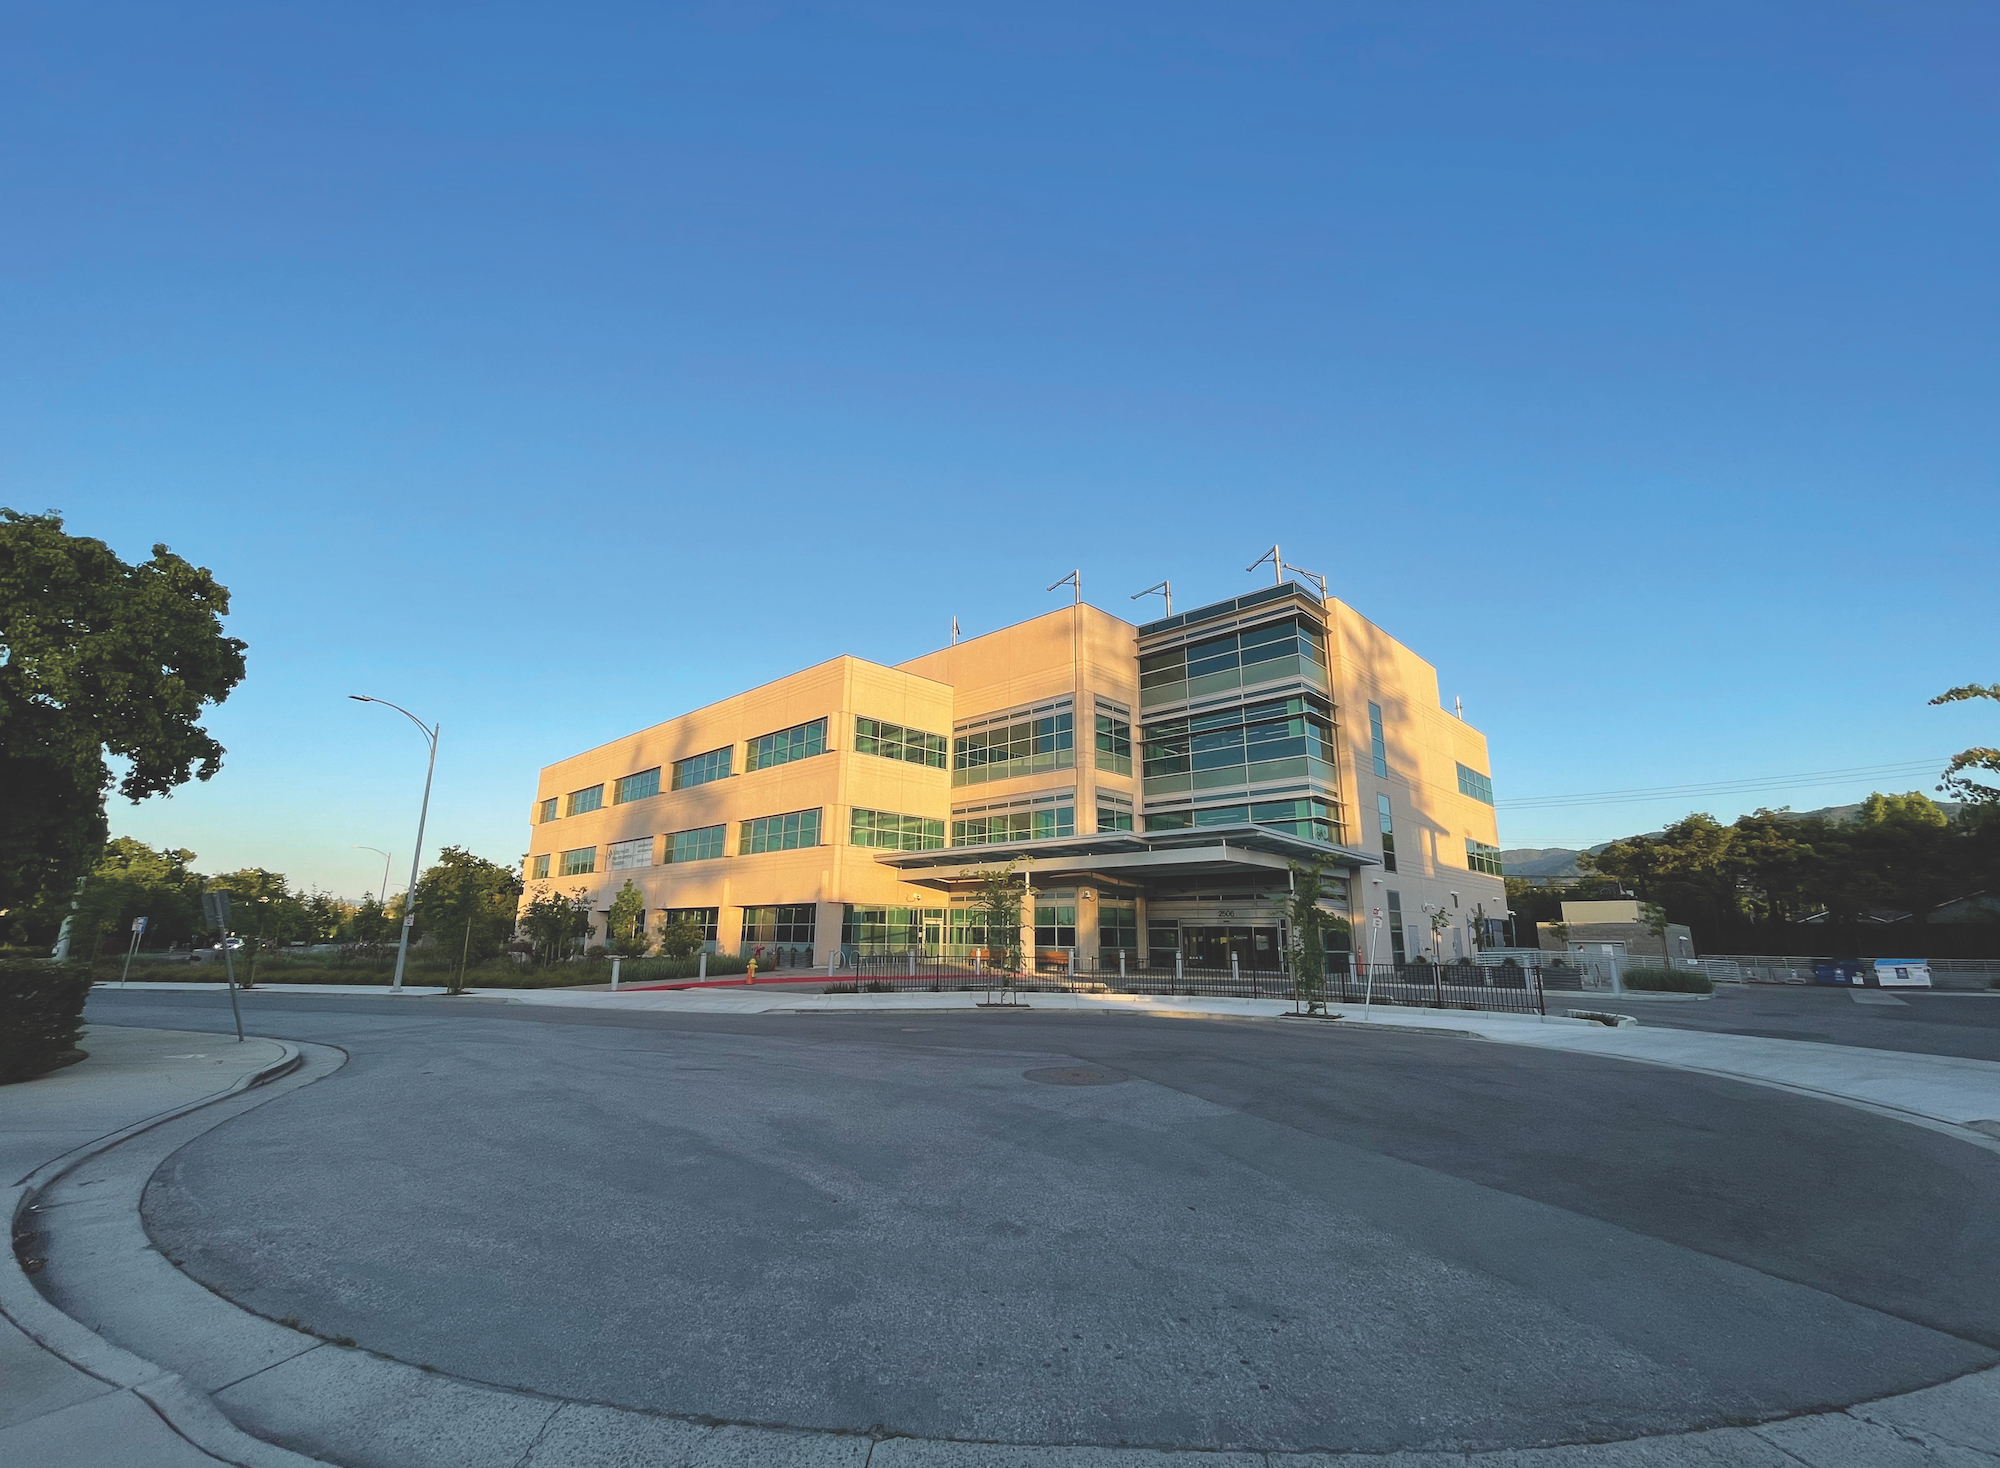 Sutter Health’s new Samaritan Court Ambulatory Care and Surgery Center finishes three months early, $3 million under budget